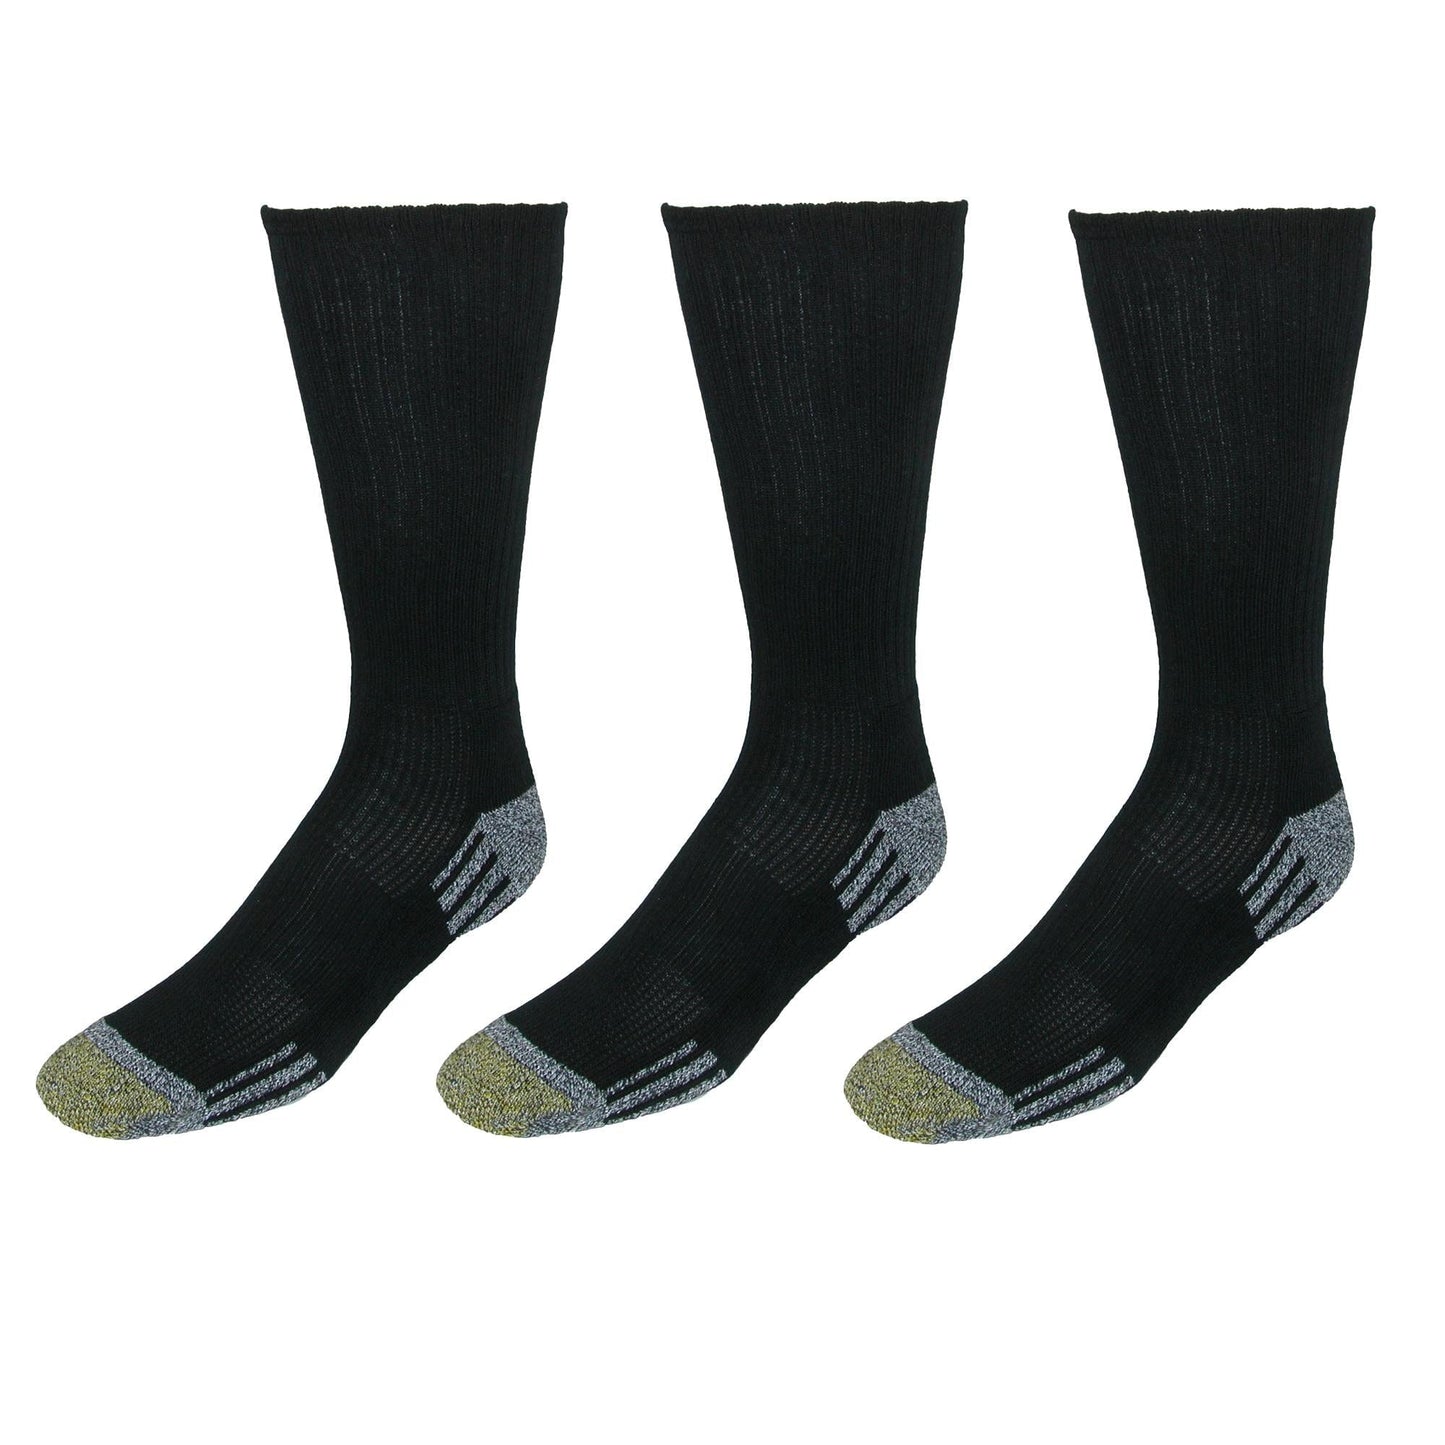 Gold Toe Men's Cushioned Sole Outlast Crew Socks (3 Pair Pack)